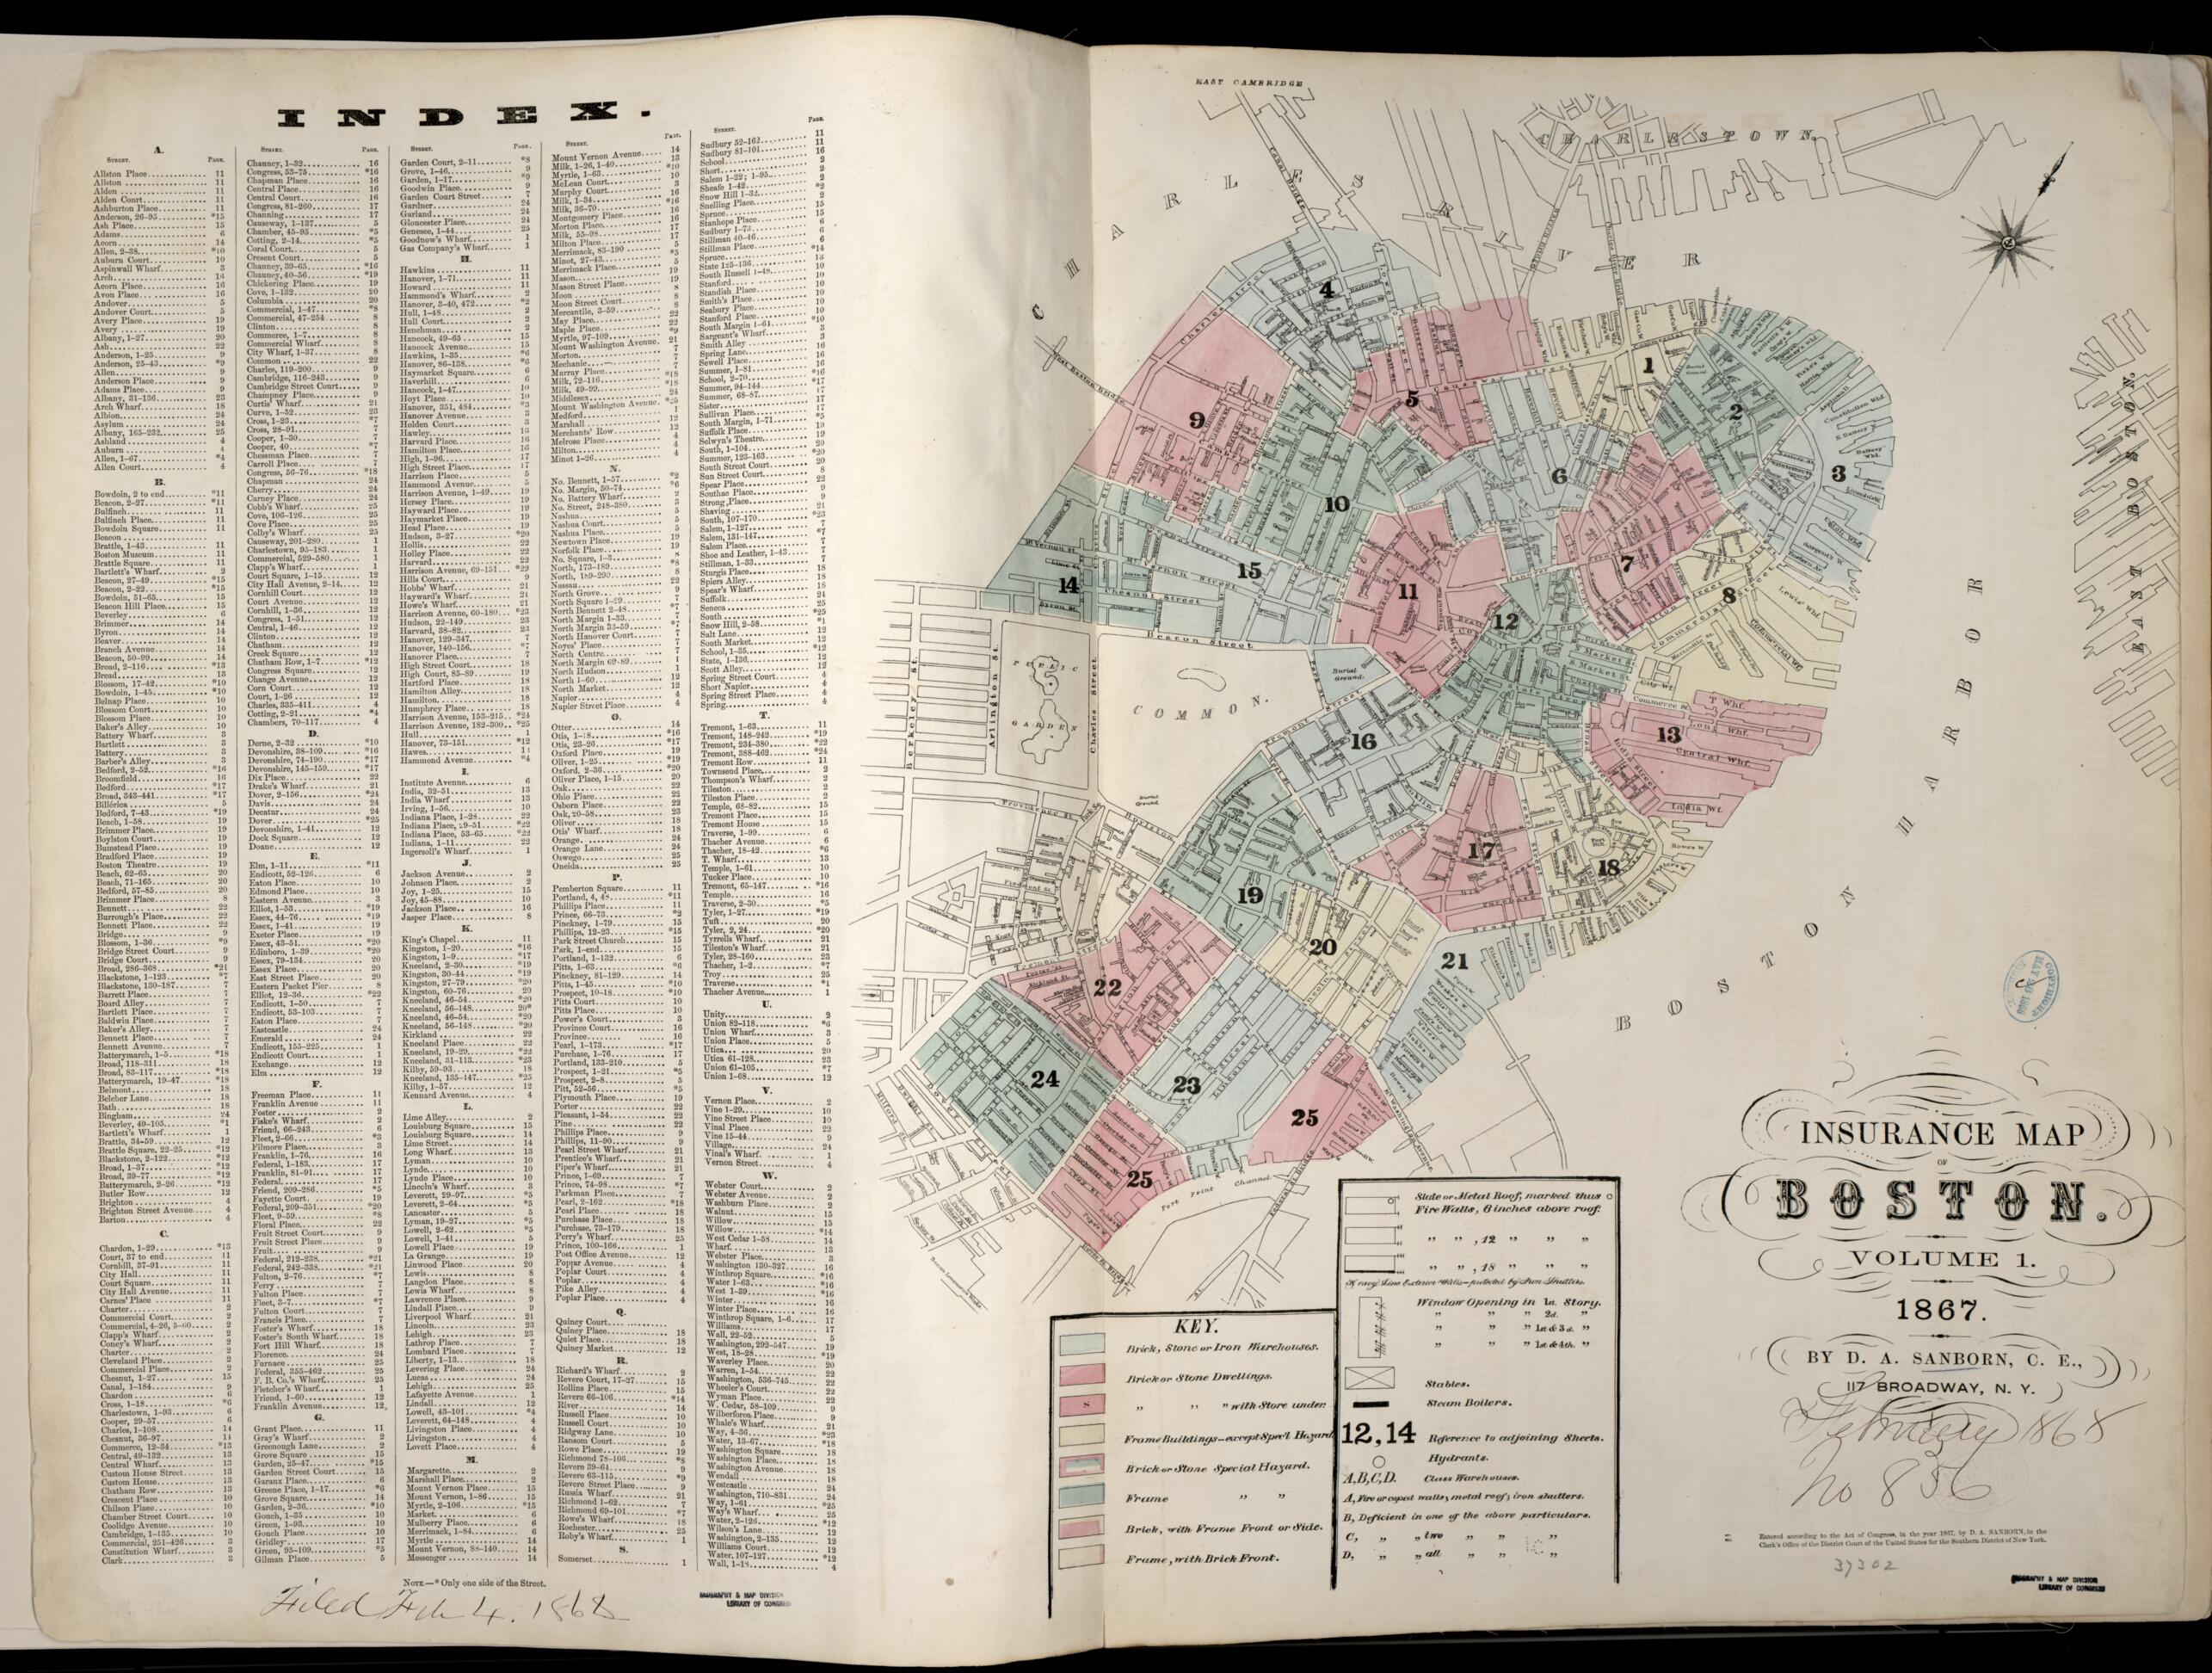 This old map of Image 1 of Boston from Insurance Map of Boston. Volume 1 from 1867 was created by D. A. (Daniel Alfred) Sanborn in 1867